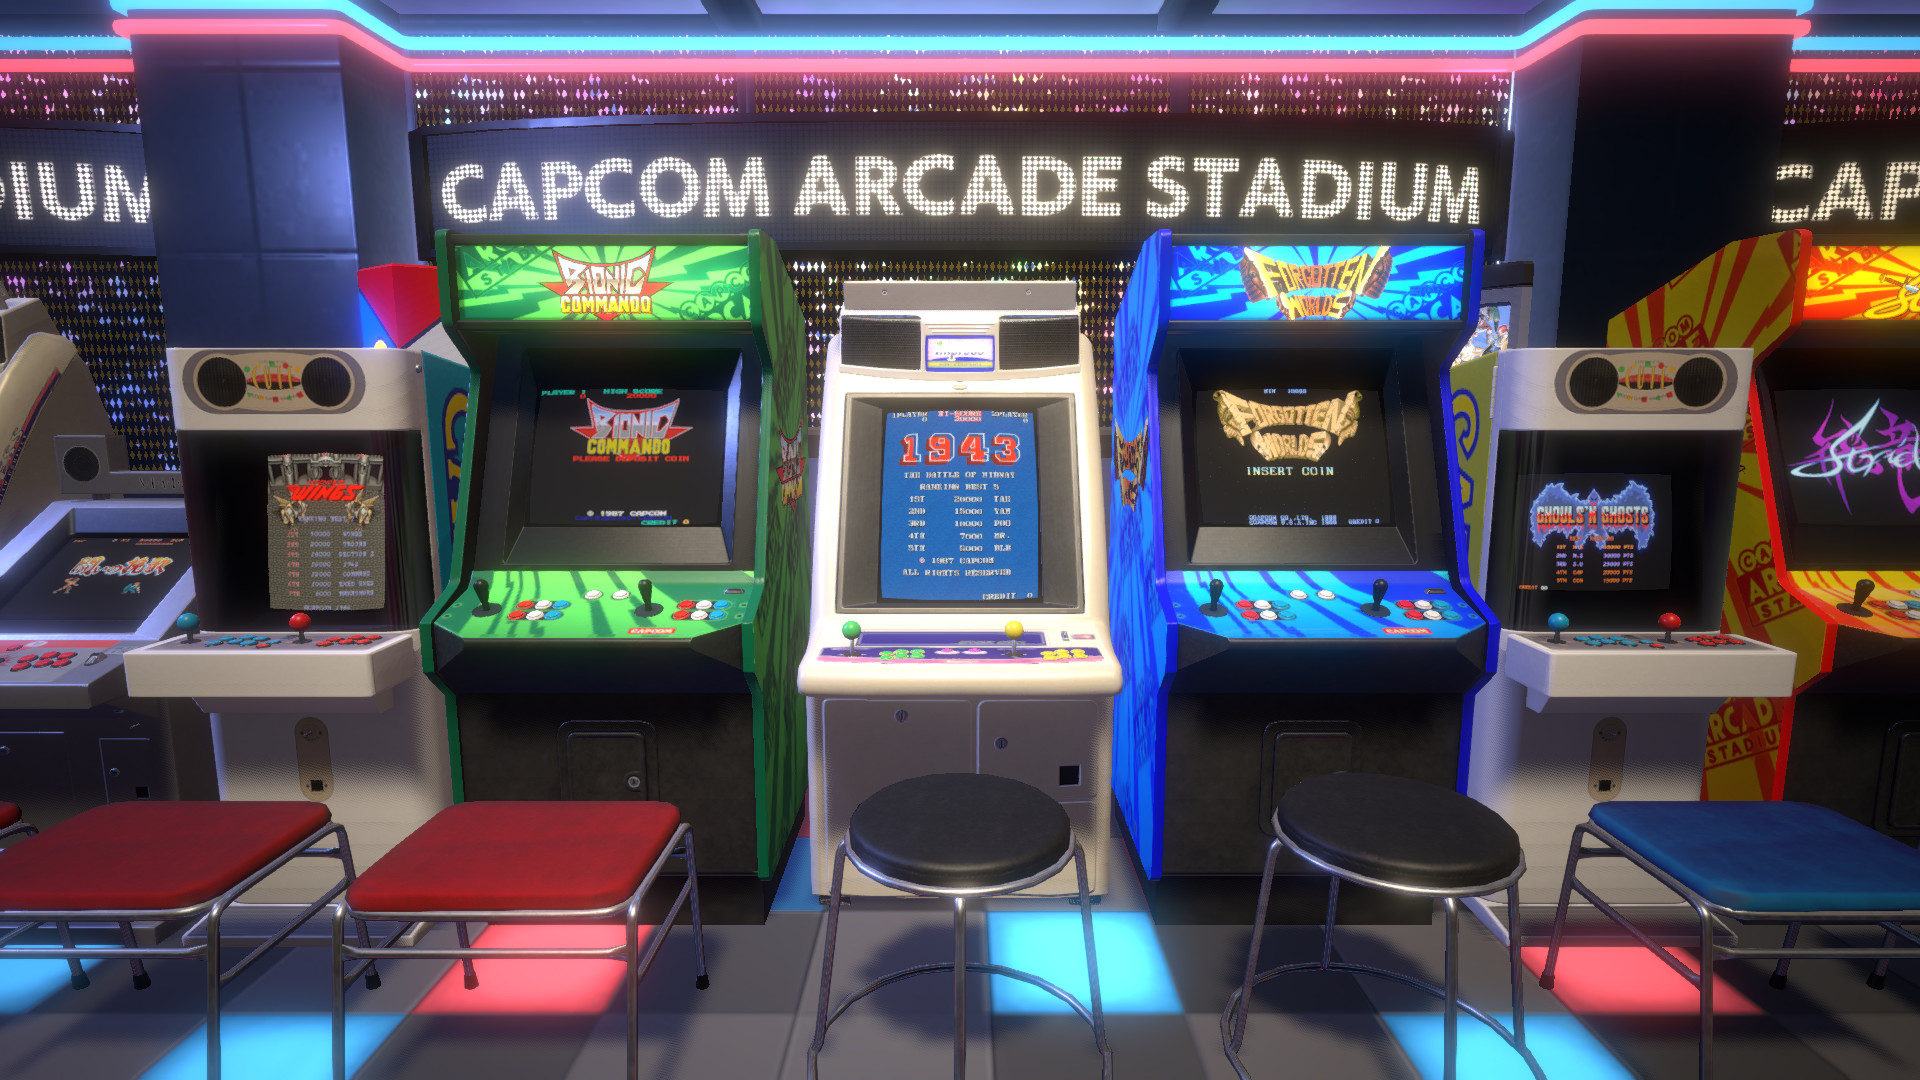 Capcom’s arcade emulation collection is the eighth-biggest Steam game of all time